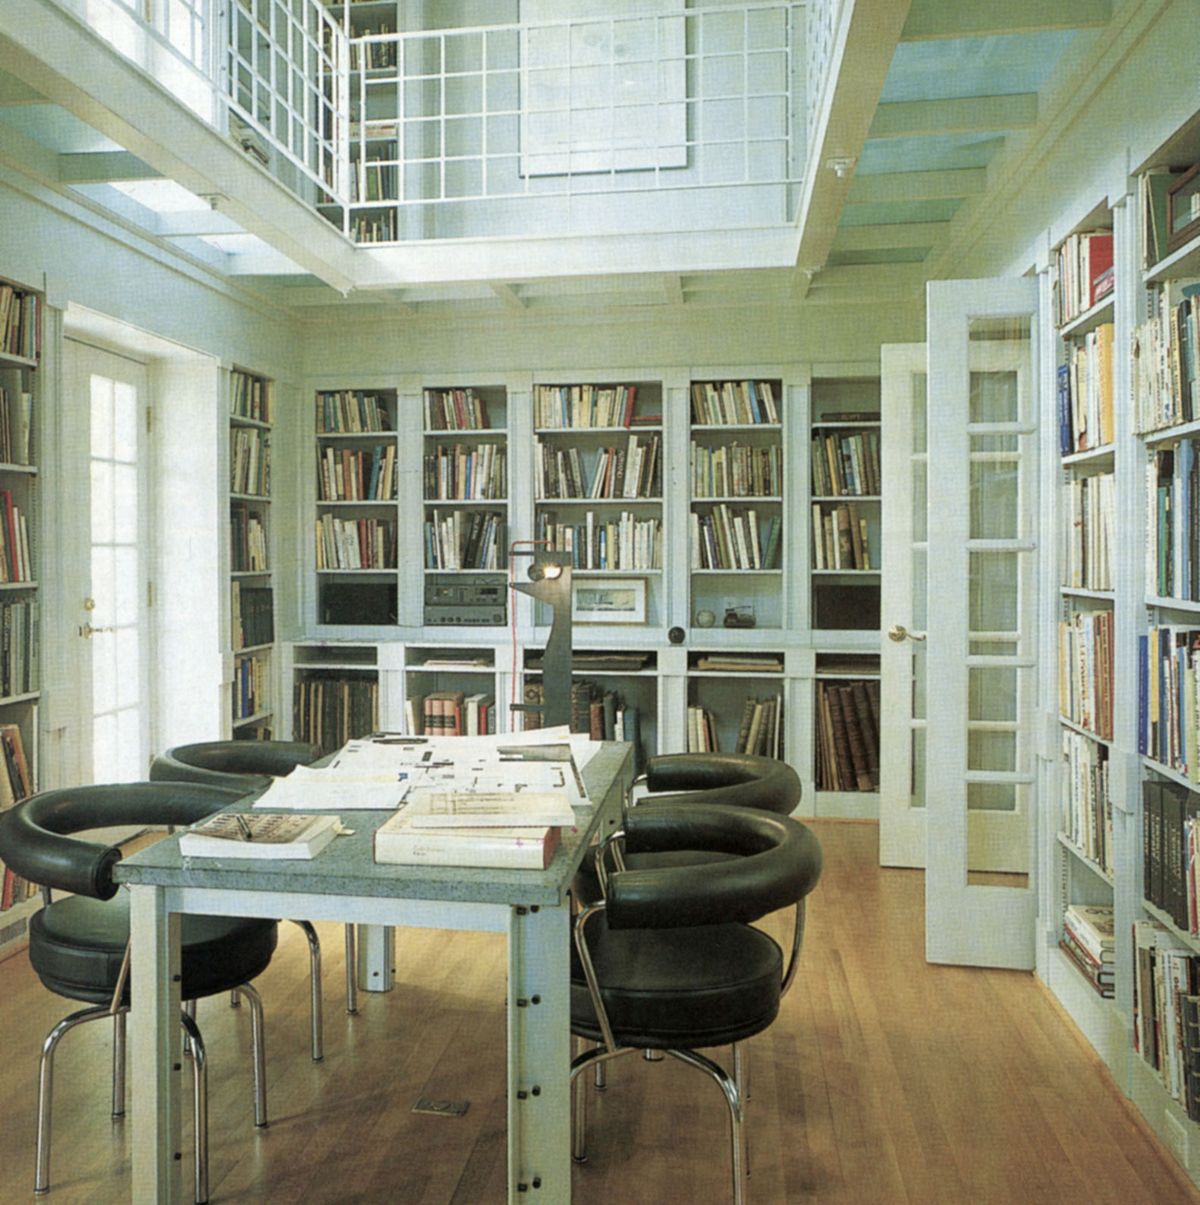 professorial looking white library with open and glassed shelving and a long metal table with leather chairs pulled up to it and a second floor balcony with more shelving